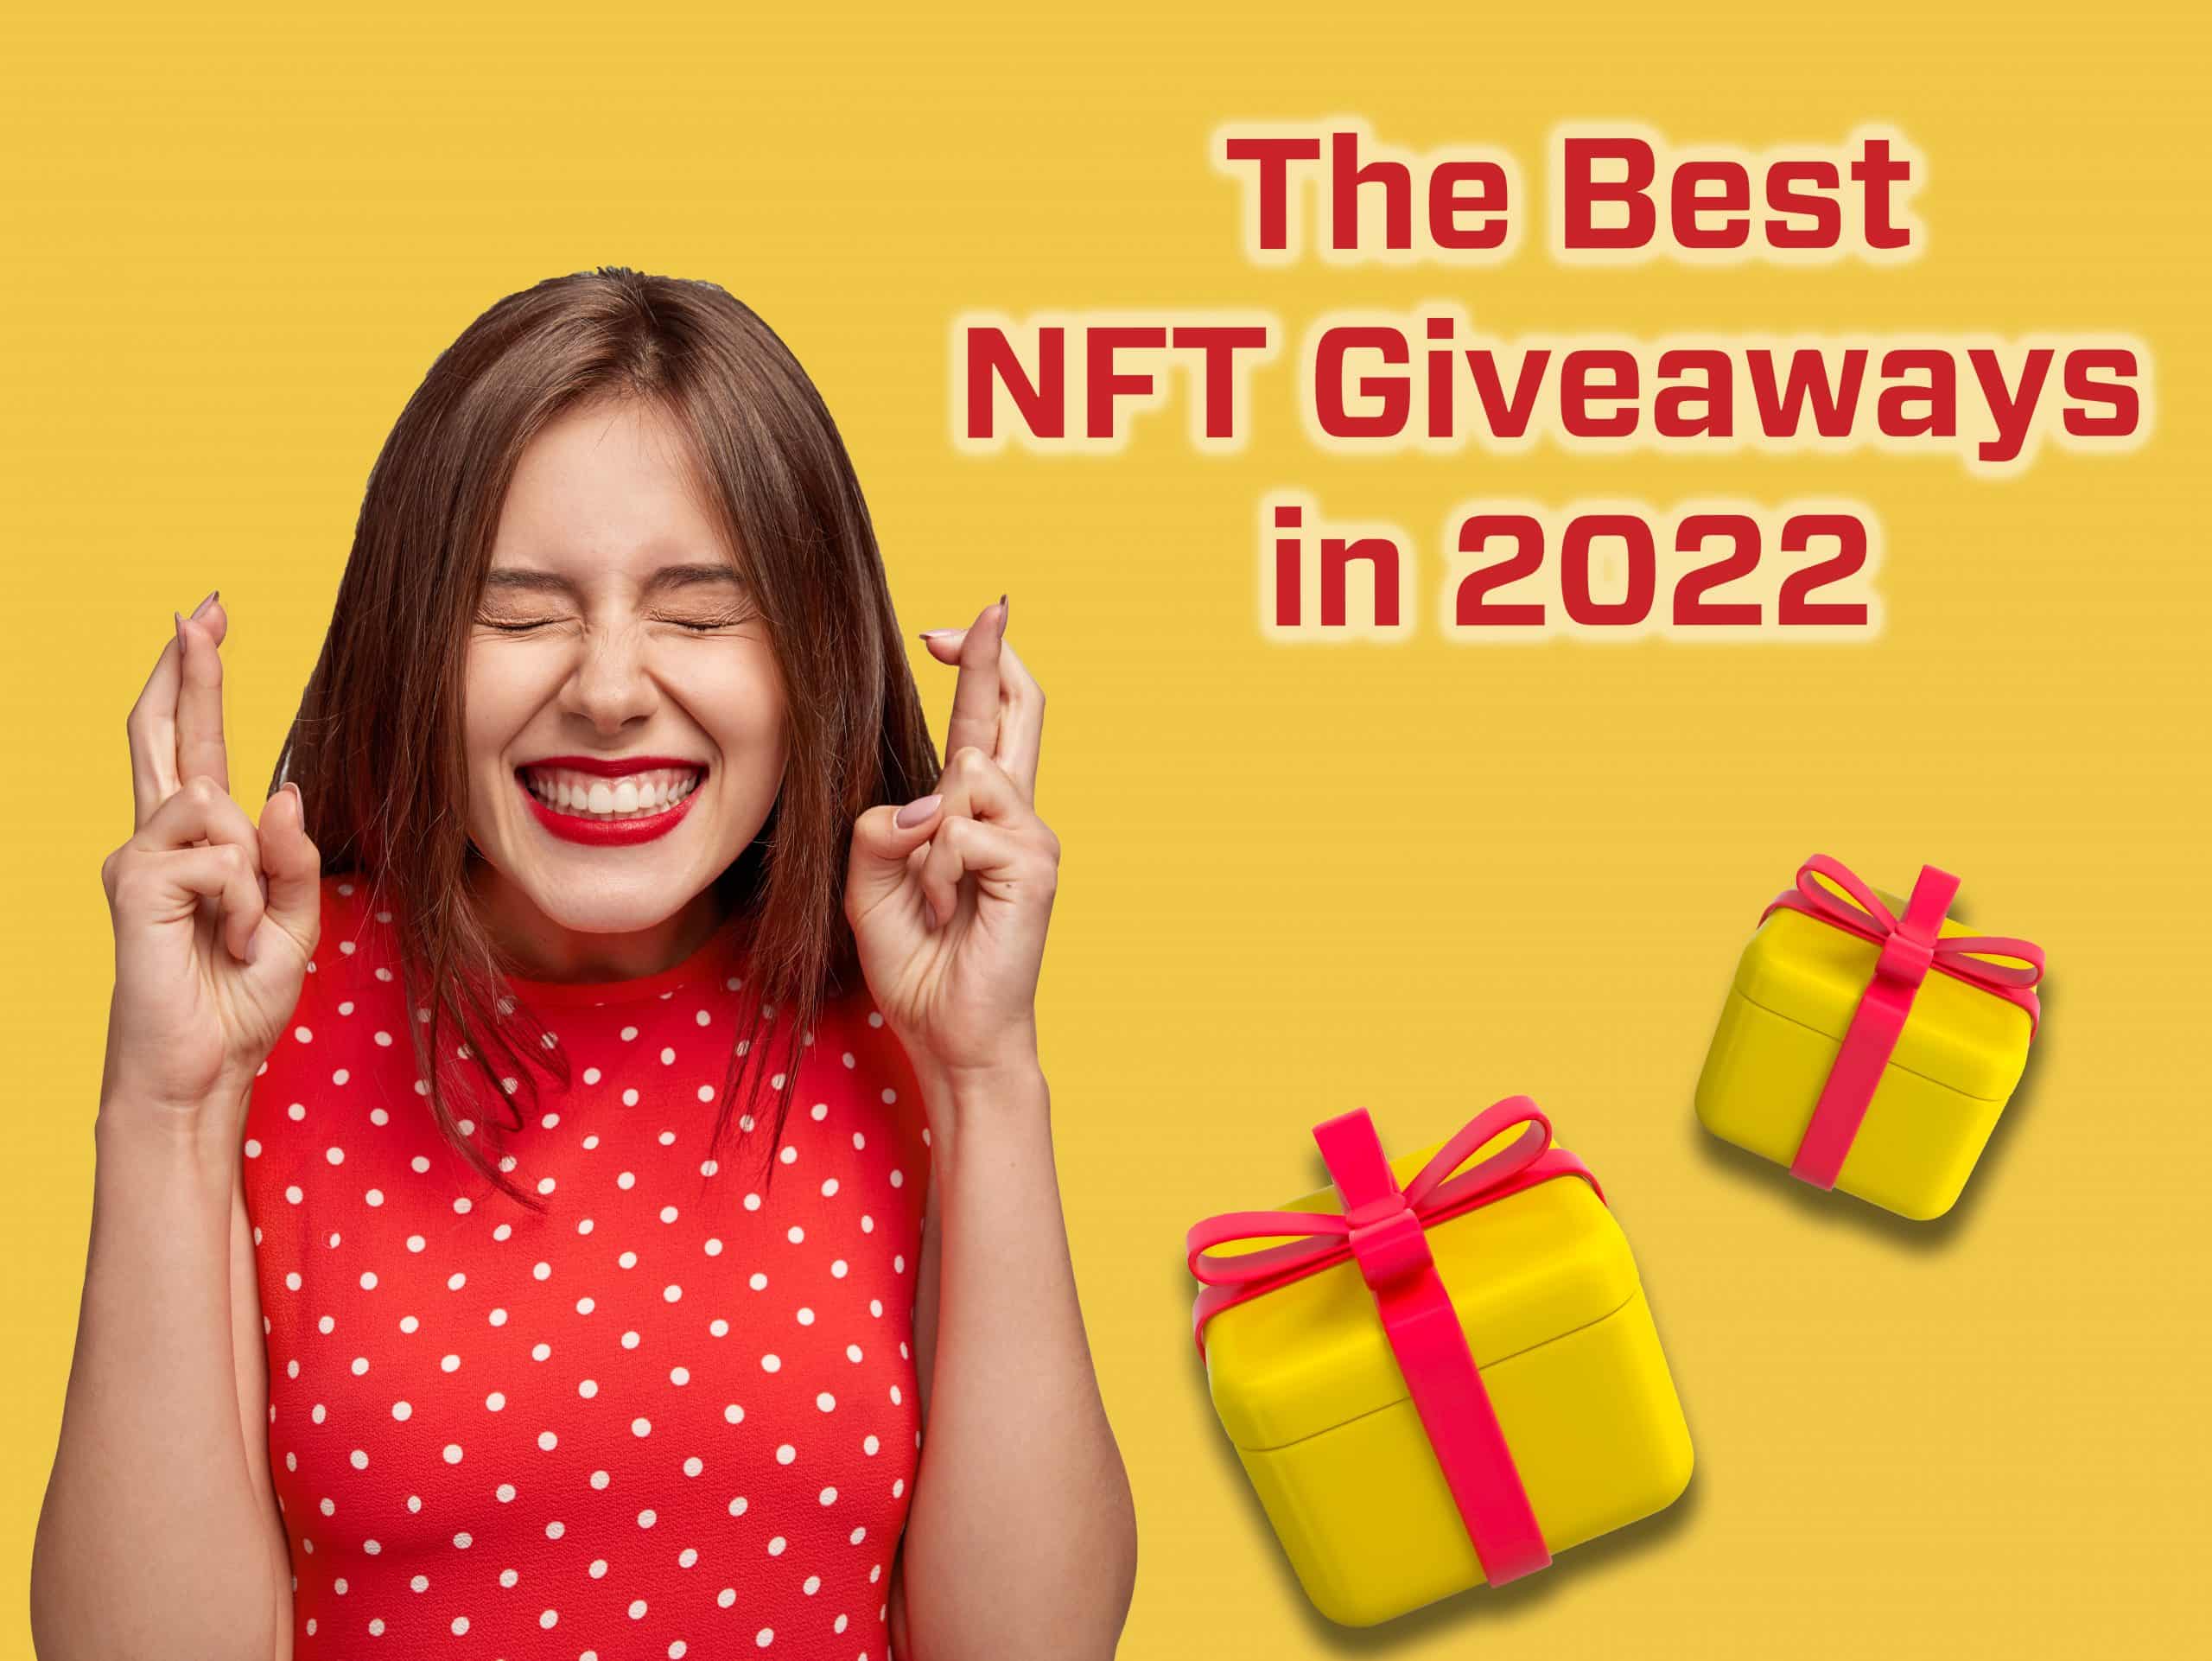 image of a woman alongside two gift boxes to conceptualize free NFT giveaways